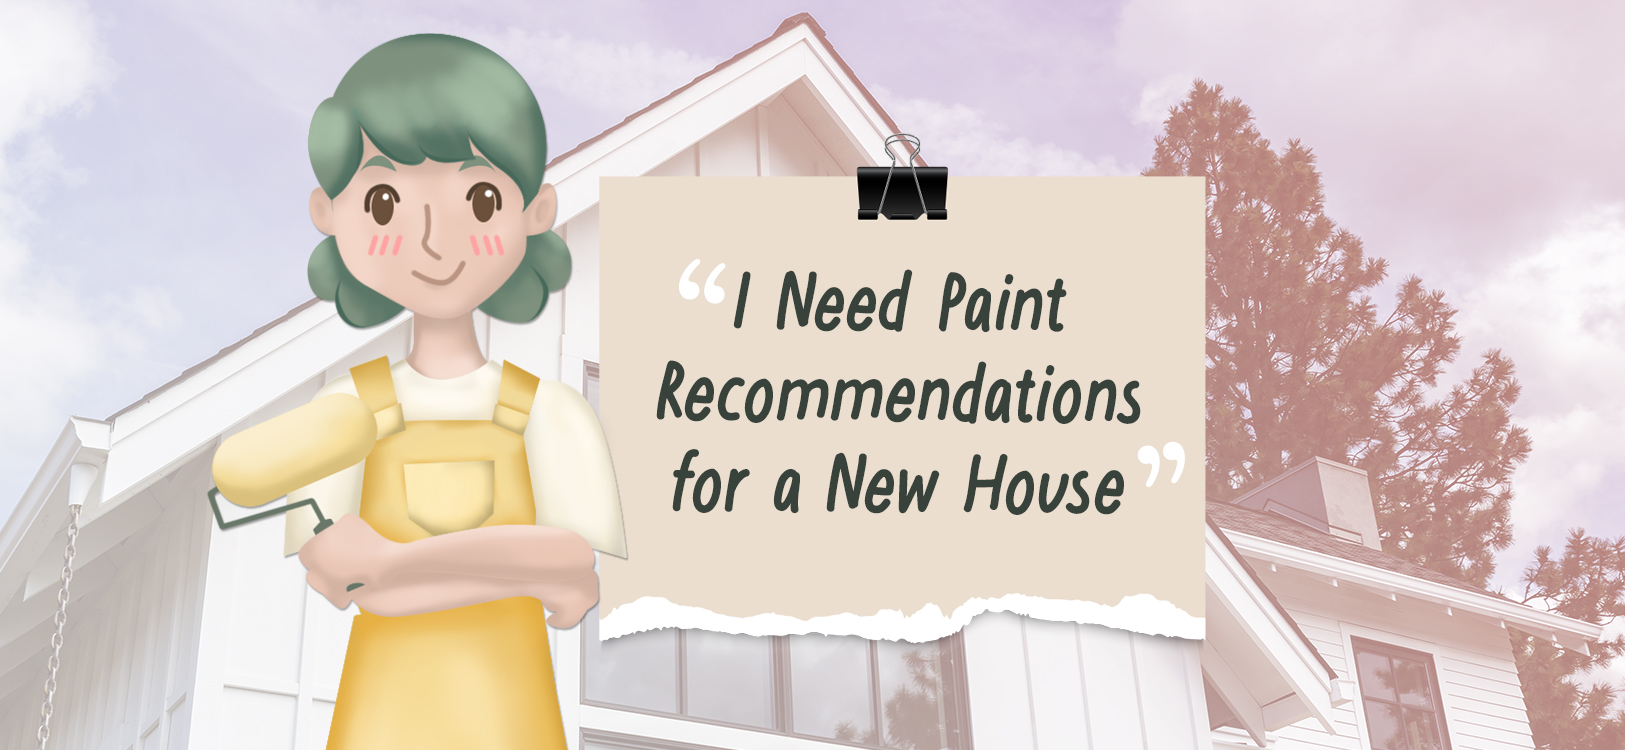 Paint TechTalk with Lettie: I Need Paint Recommendations for a New House